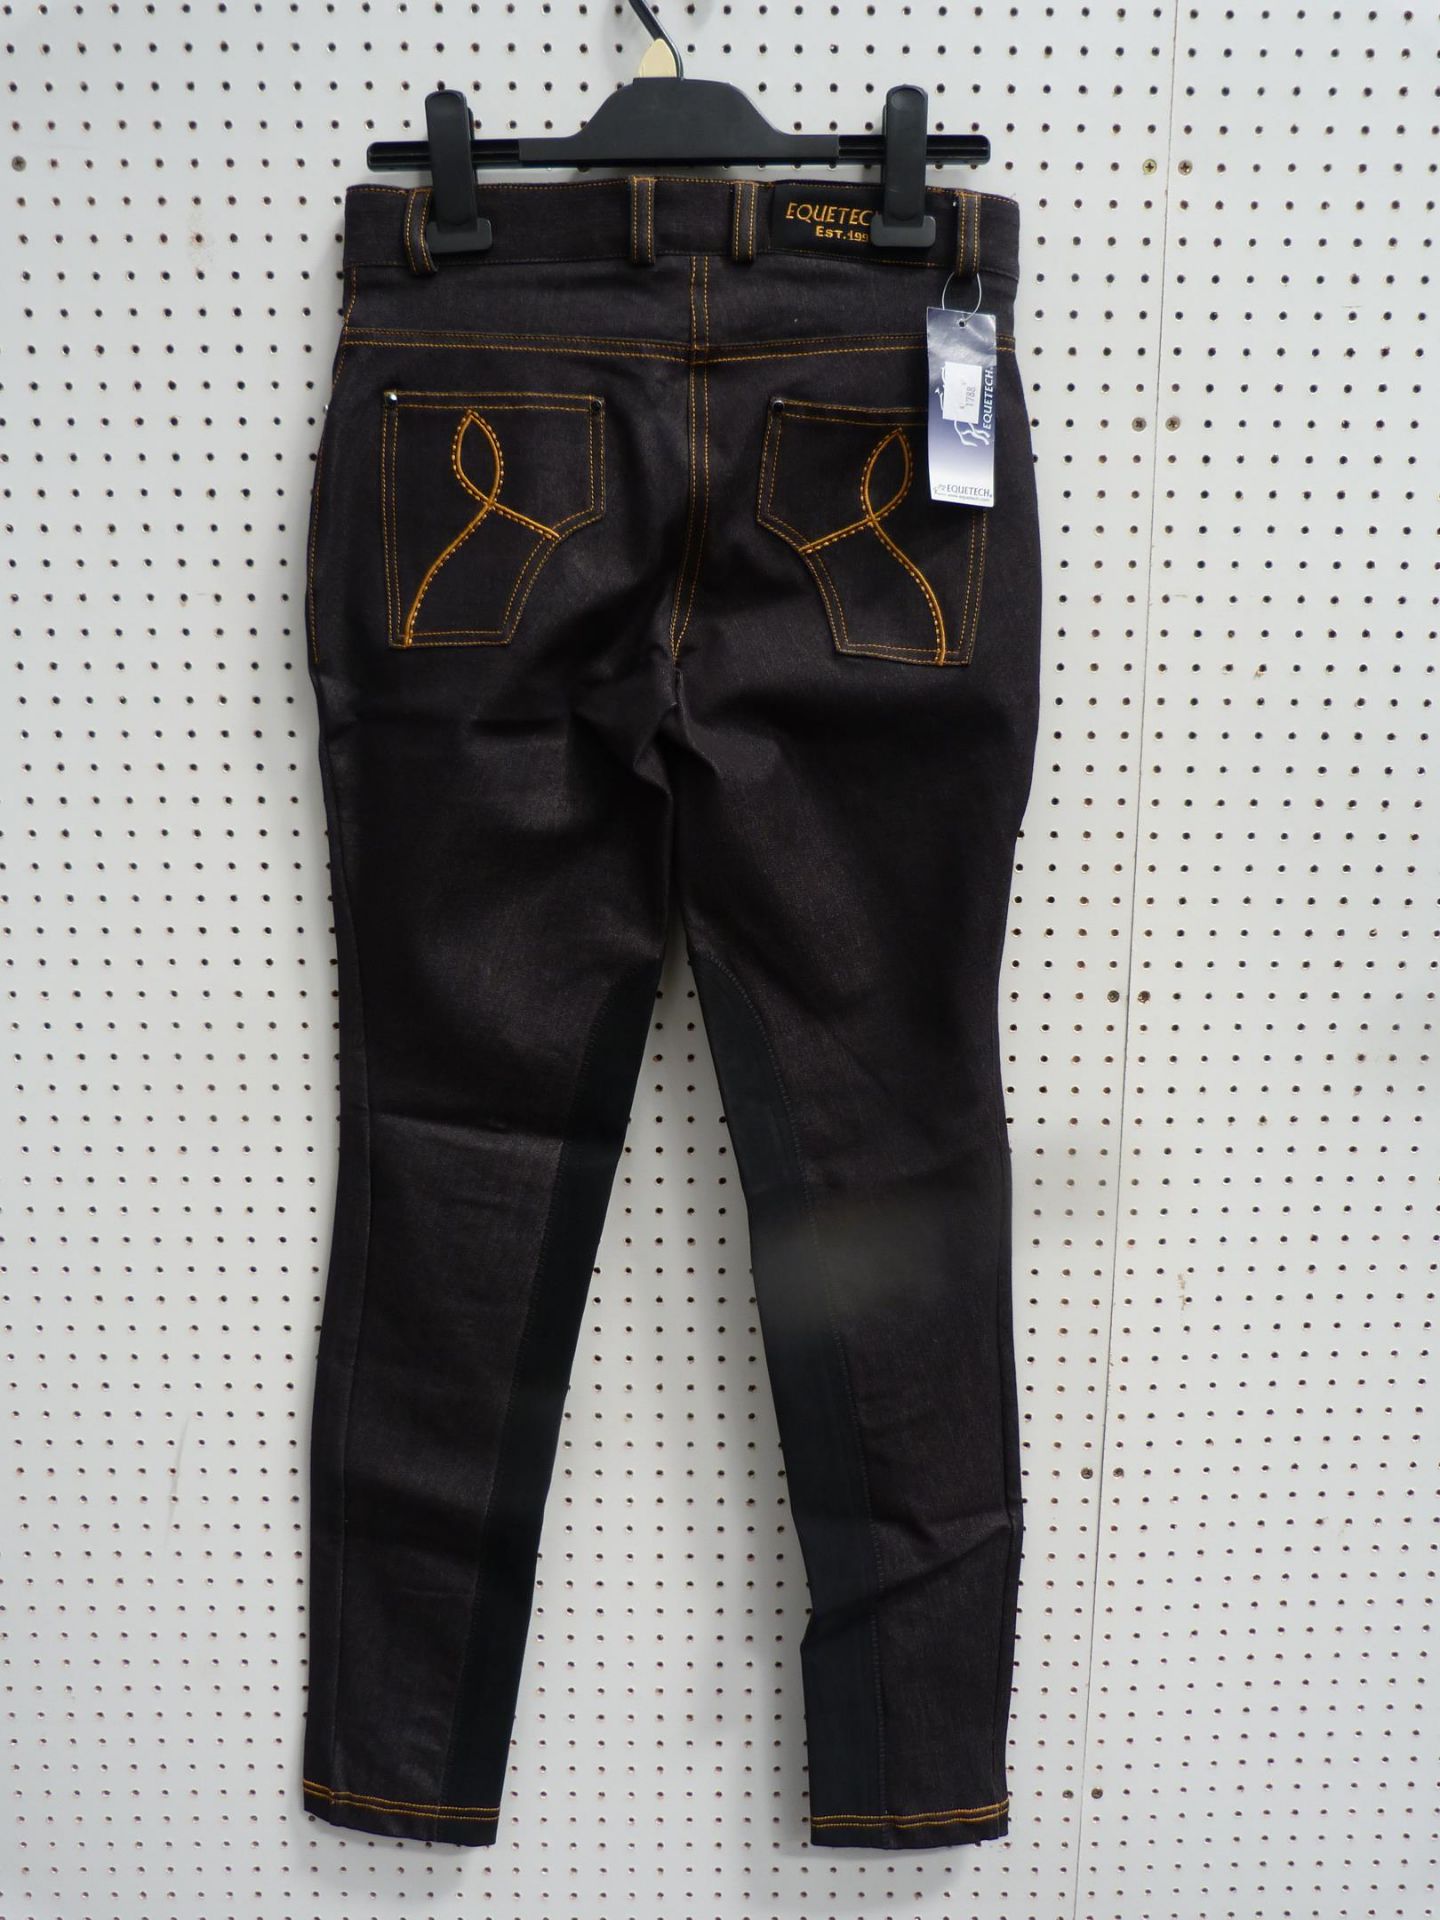 * Two Pairs of New Equatech Skinny Riding Jeans in Black Denim. One Pair size 8 long the other 16 - Image 2 of 2